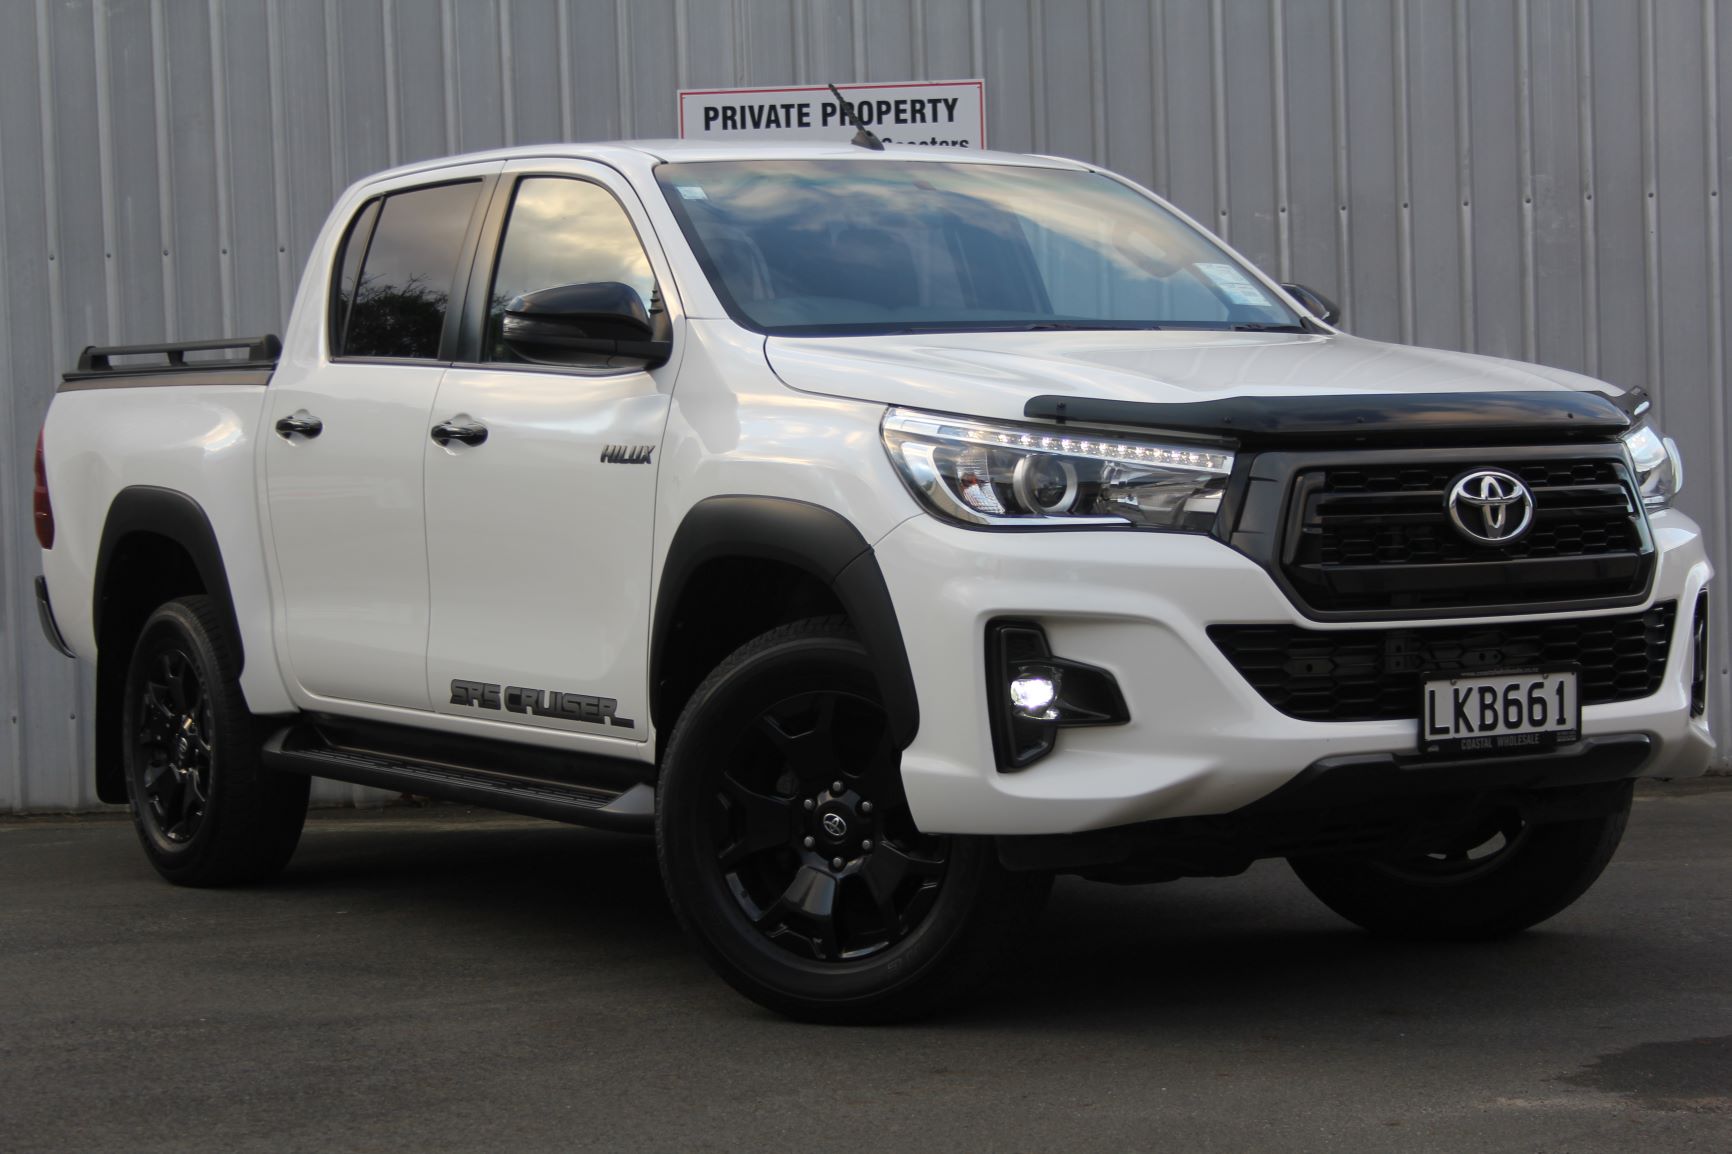 Toyota HILUX AUTO SR5 CRUISER 2018 for sale in Auckland